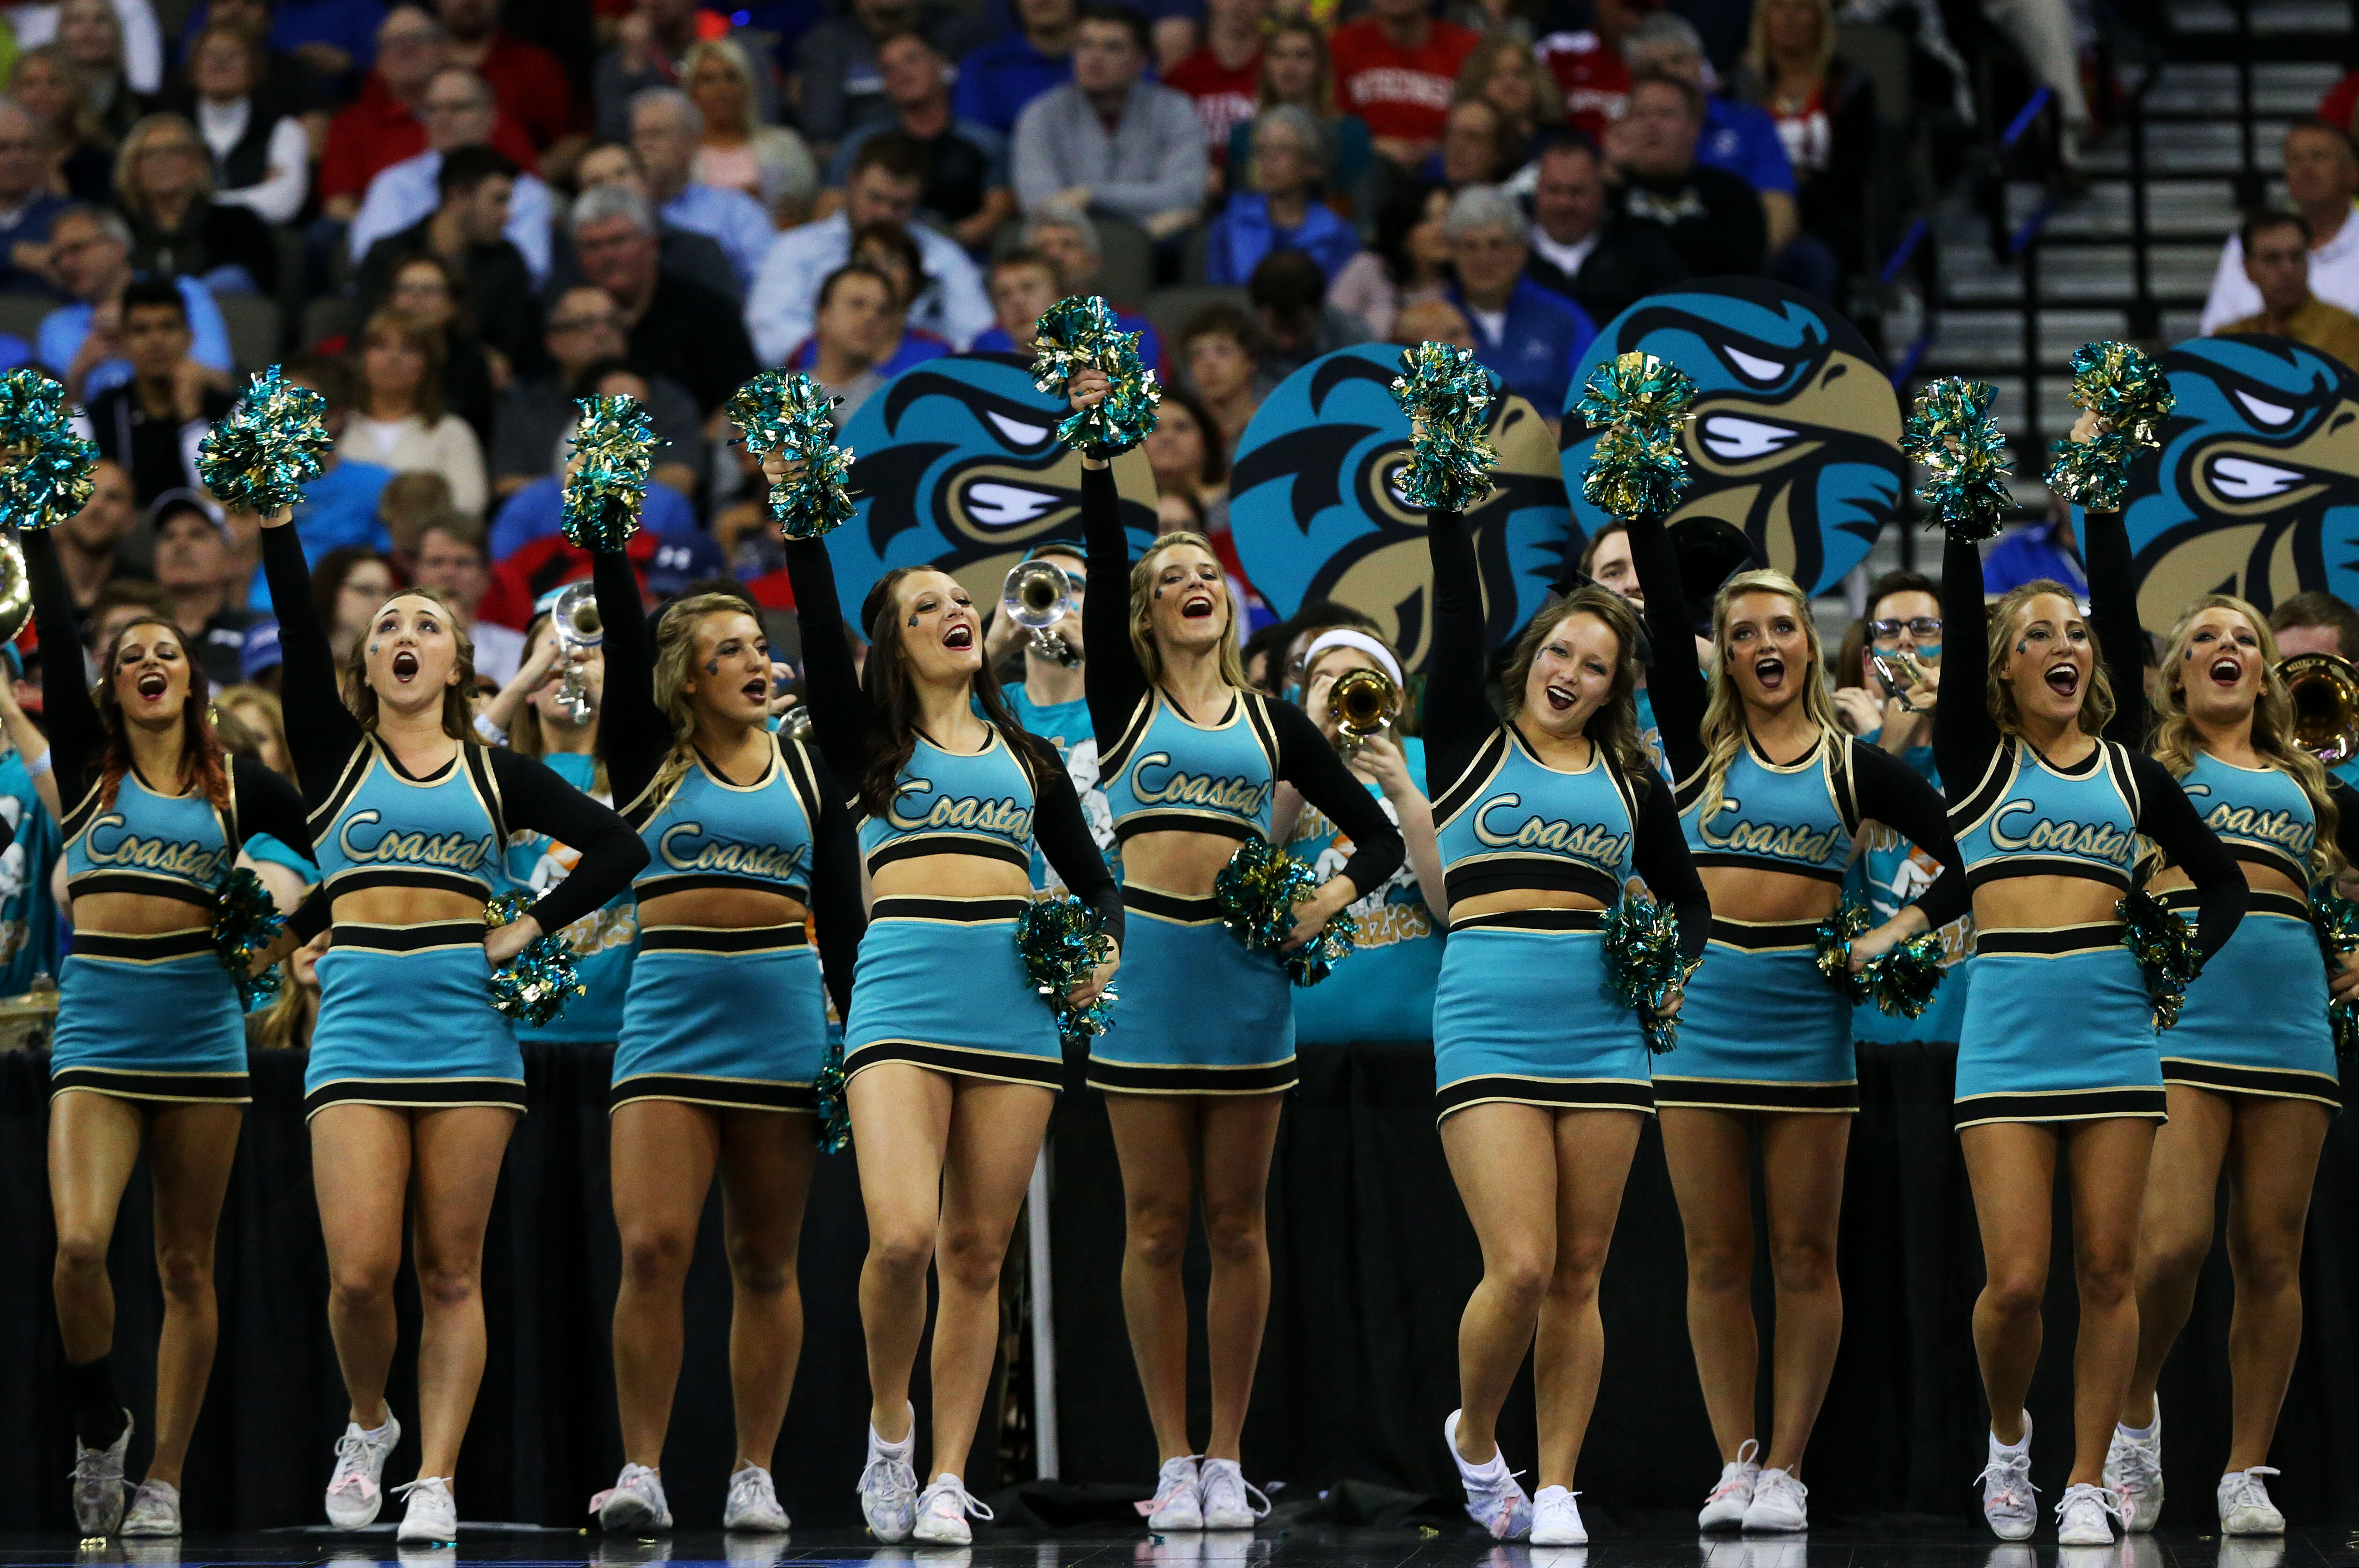 OMAHA, NE - MARCH 20:  Coastal Carolina Chanticleers cheerleaders perform in the first half against the Wisconsin Badgers during the second round of the 2015 NCAA Men's Basketball Tournament at the CenturyLink Center on March 20, 2015 in Omaha, Nebraska. 